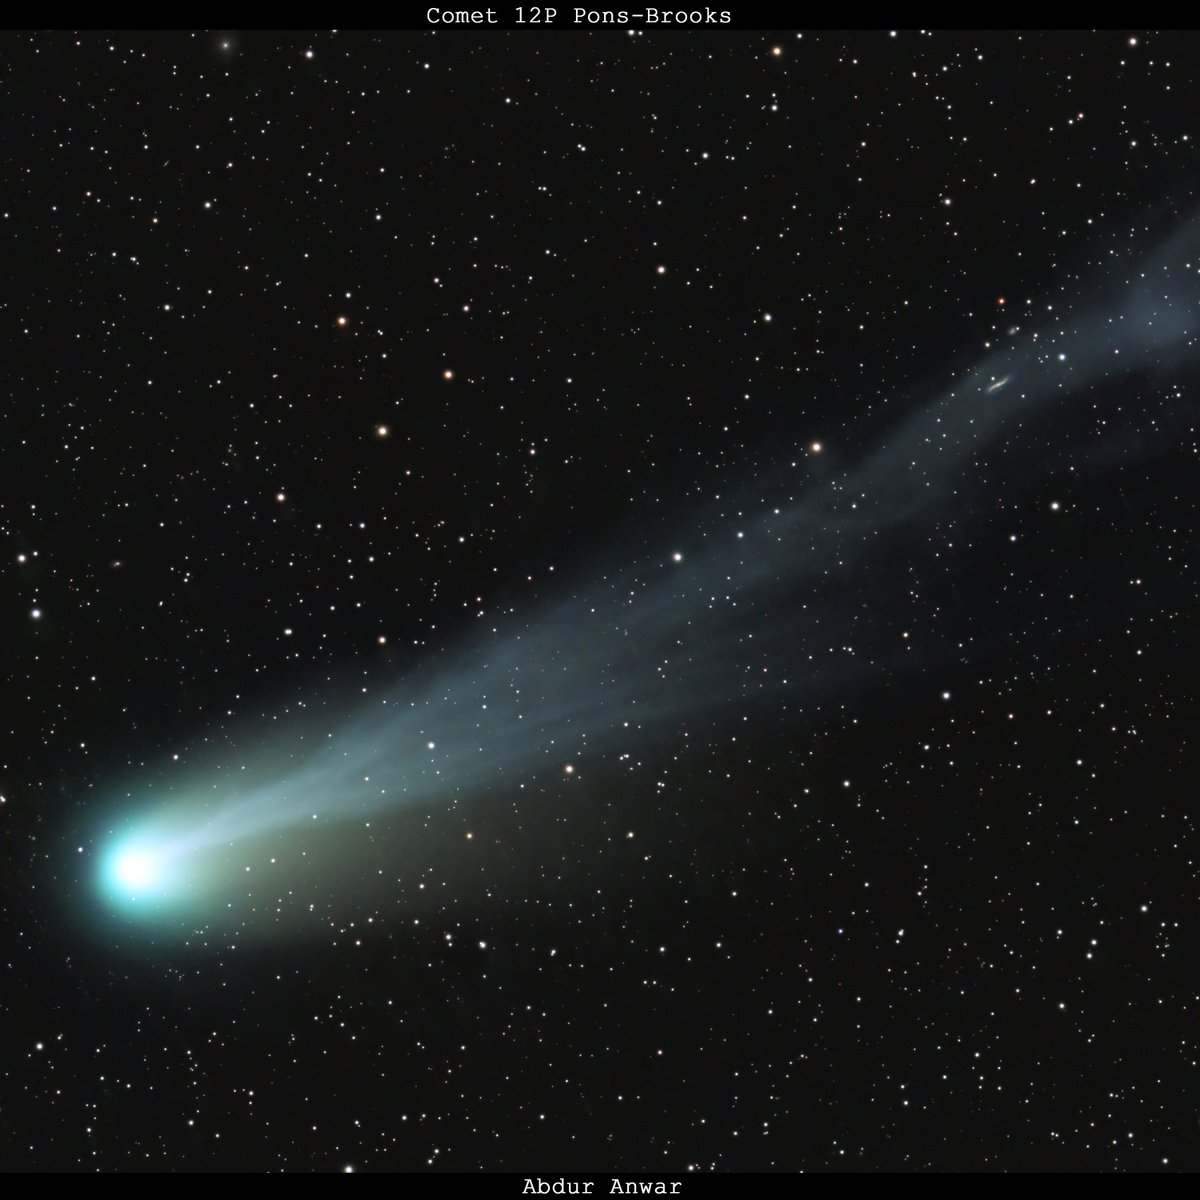 Discovered in 1812, comet 12P/Pons-Brooks has an orbital period of 71 years. More details at AbdurAstro on Insta/FB/YouTube

C11 EdgeHD Hyperstar V3 (560mm)
Skywatcher EQ6R
ASI2600MC Duo (no filters)
Total integration time: 24 mins total
#comet #comet12p #astrophotography